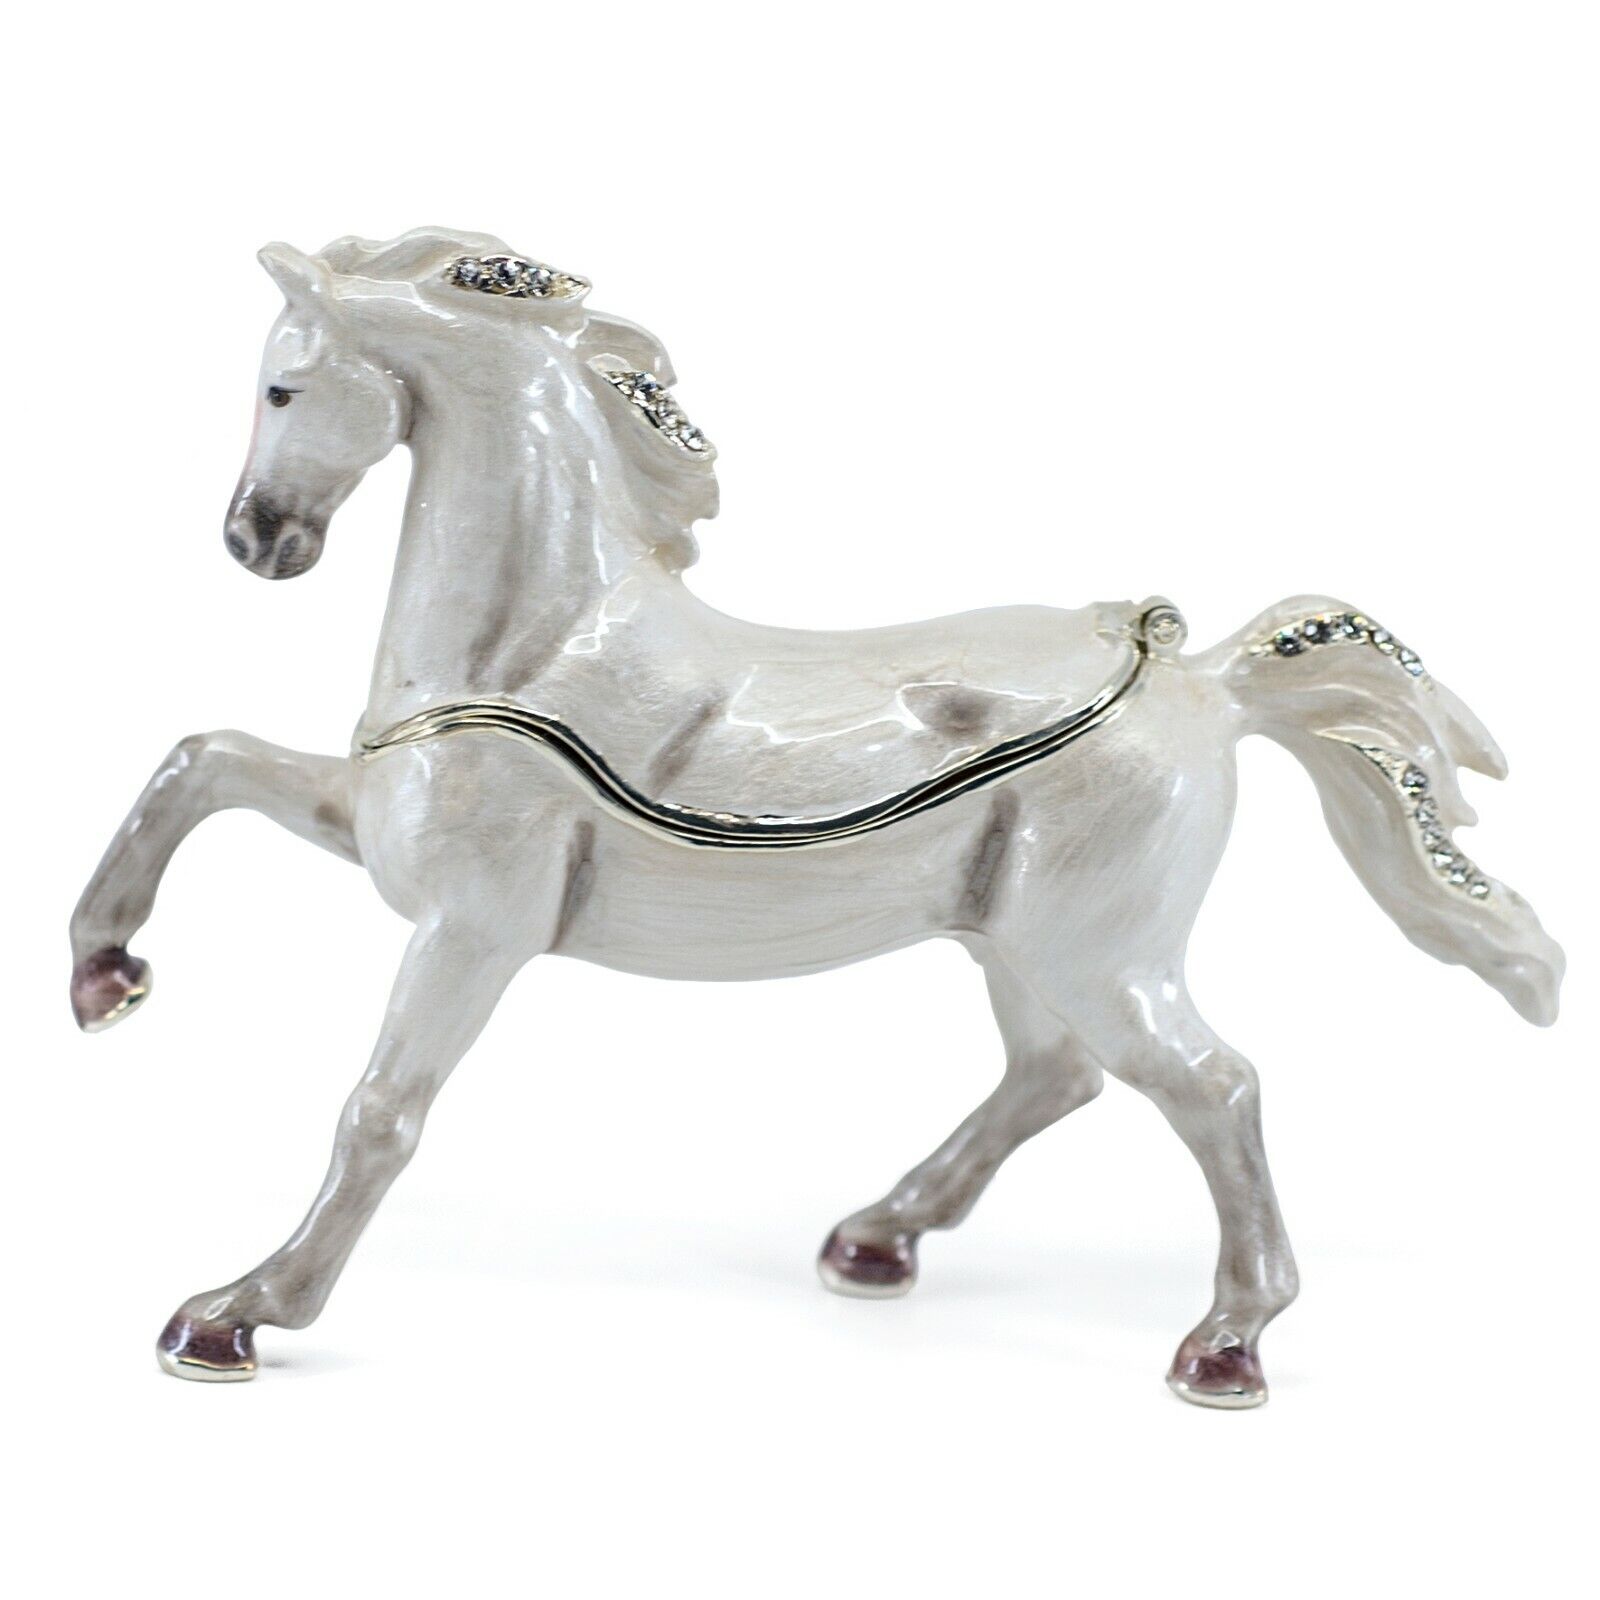 Bejeweled Enameled Pewter White Stallion Horse Trinket Box With Crystals 4.25"L Без бренда 3060